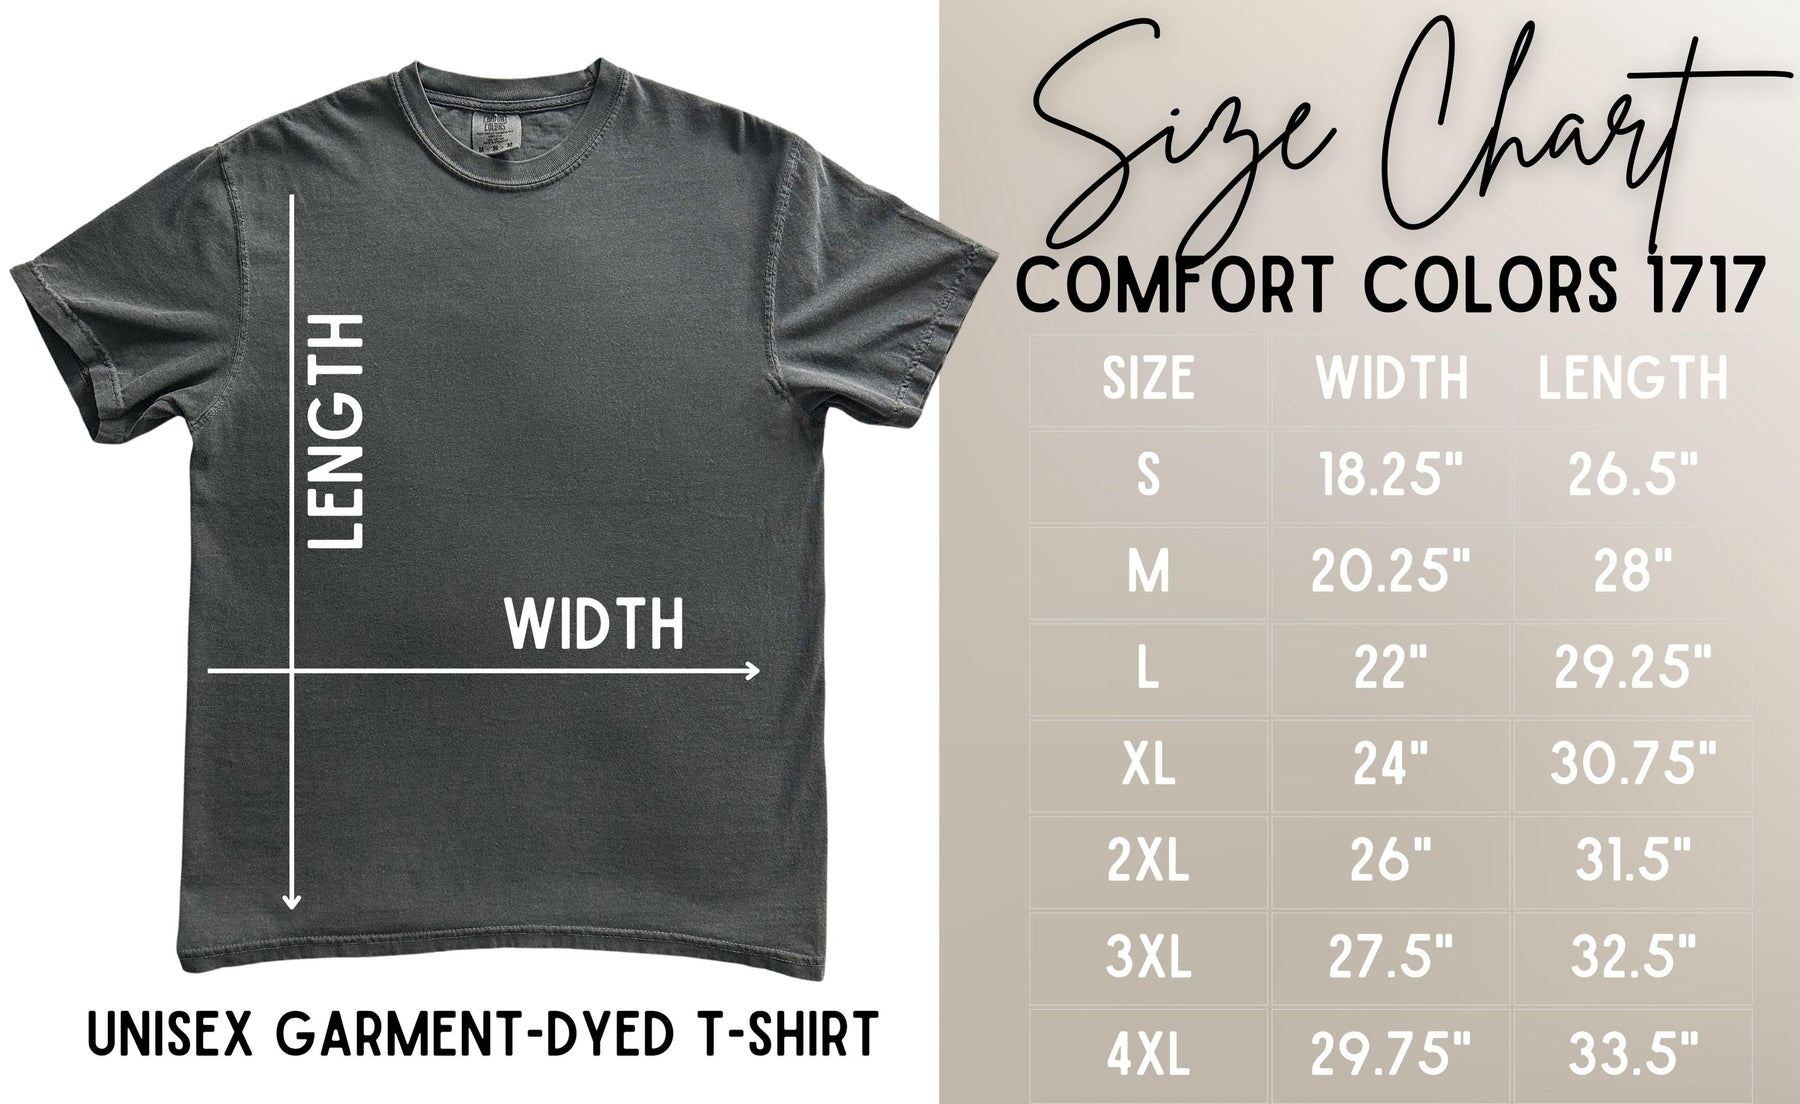 Western Humpday - Comfort Colors T-Shirt Rose with Grace LLC